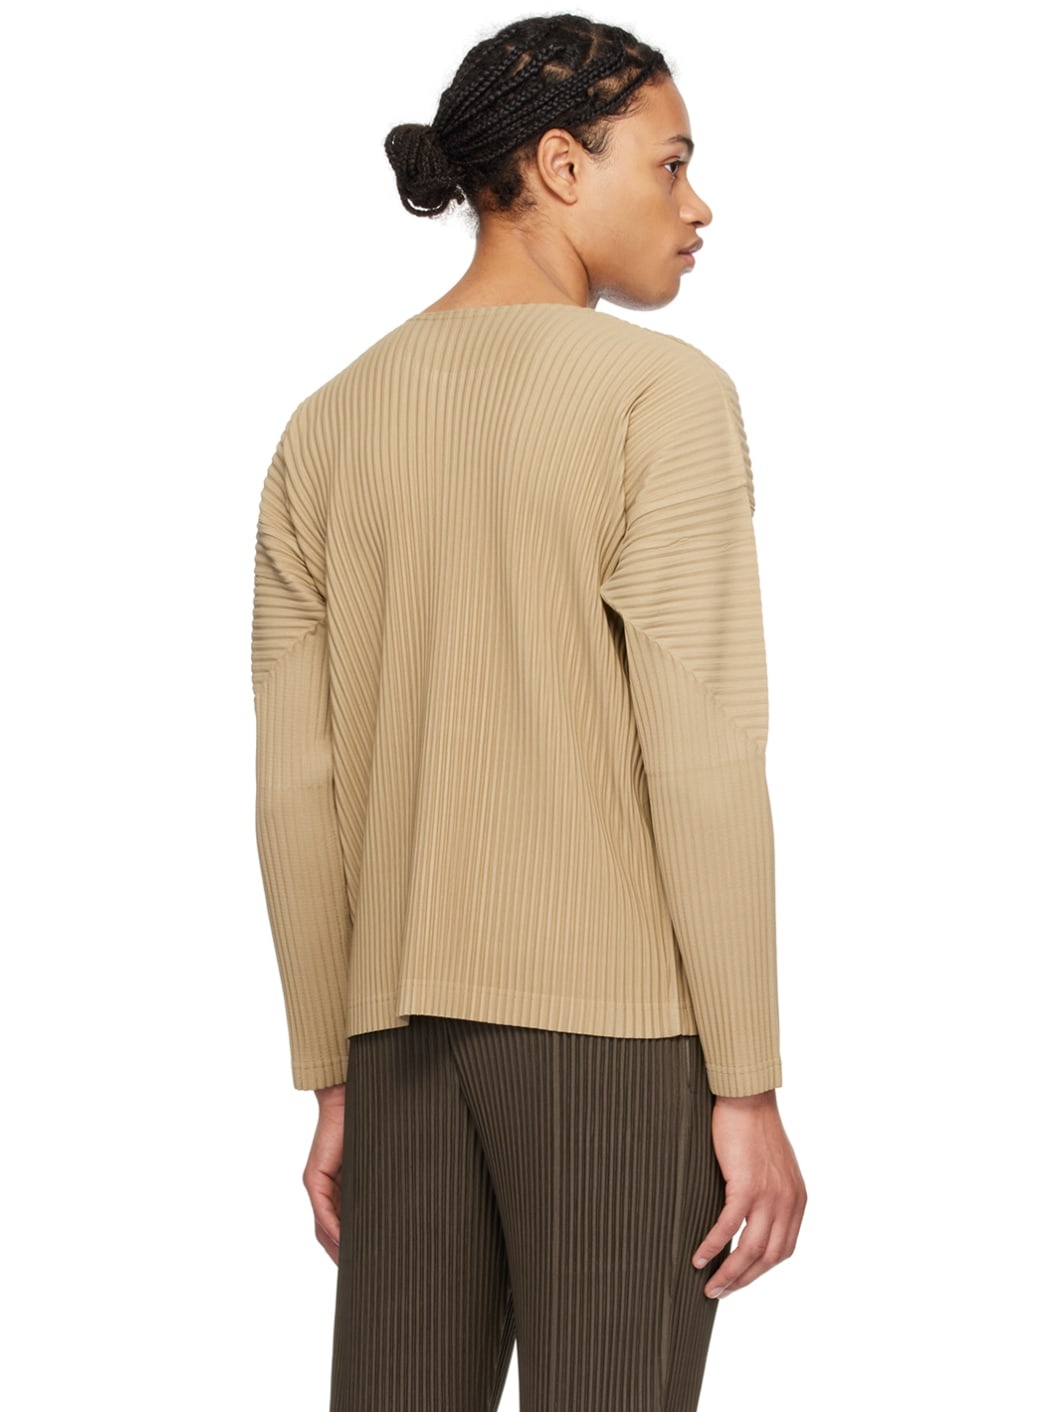 Beige Monthly Color February T-Shirt - 3